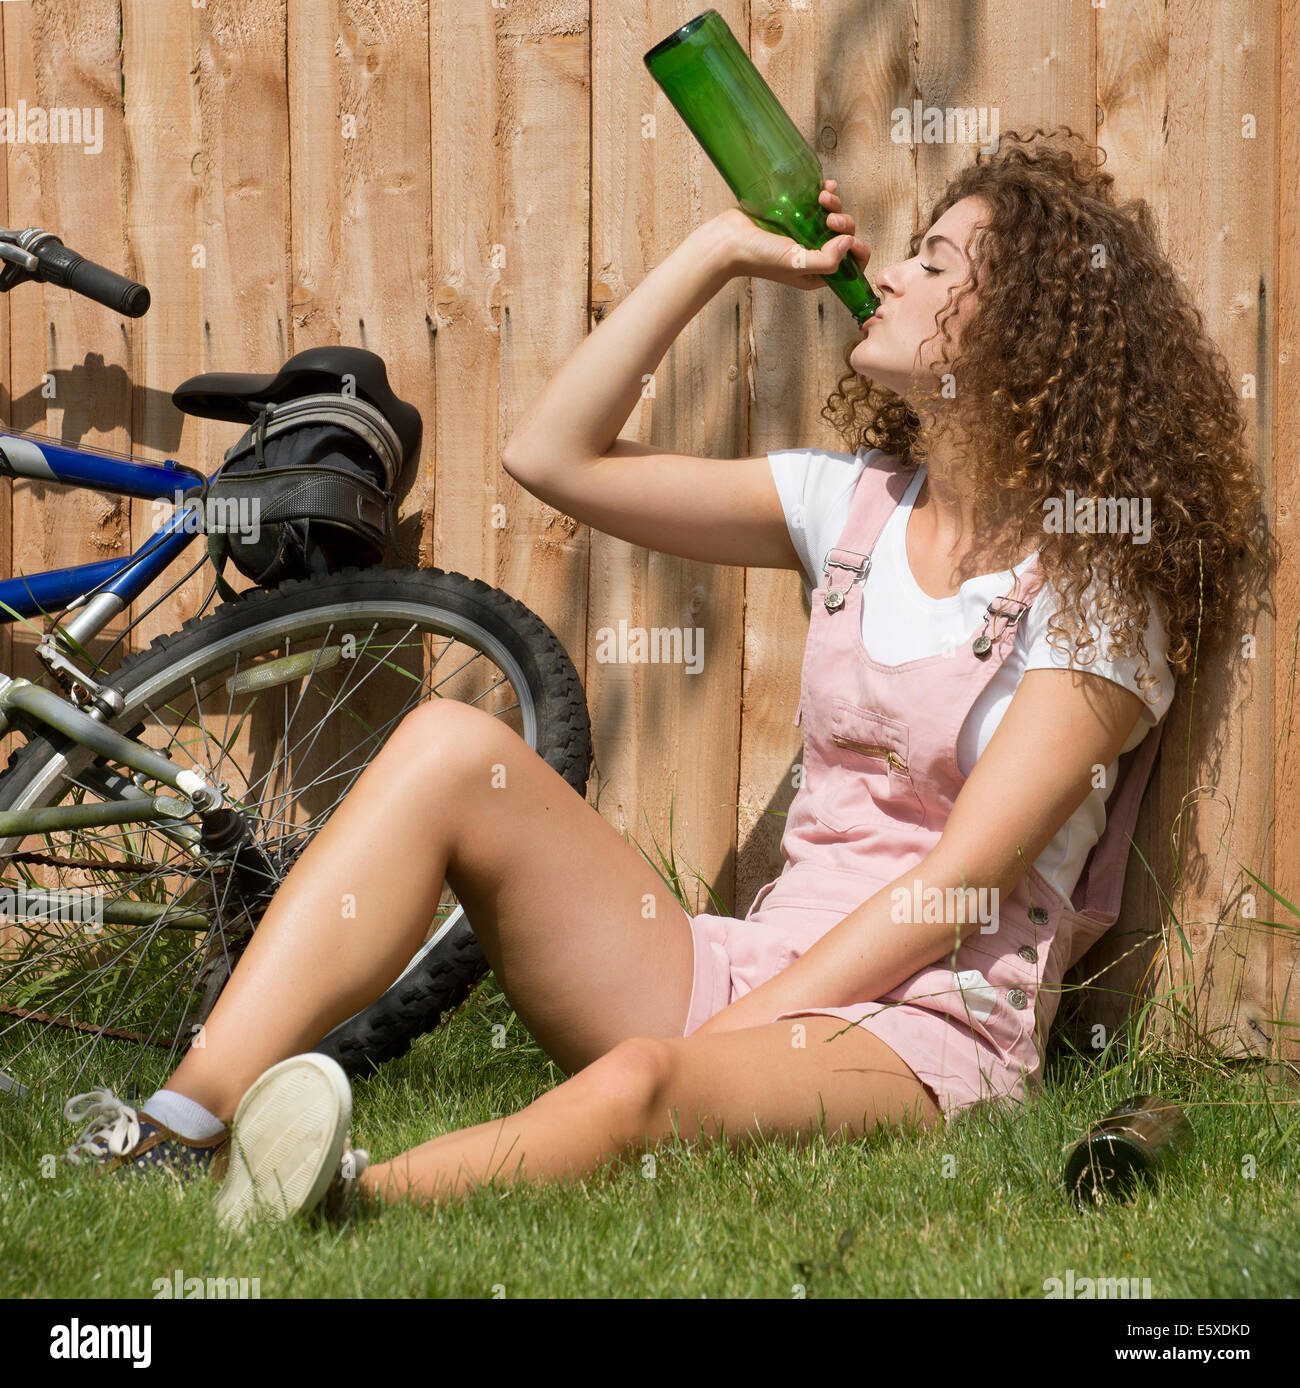 Teenage girl leaning on garden fence drinking alcohol from a glass bottle Stock Photo